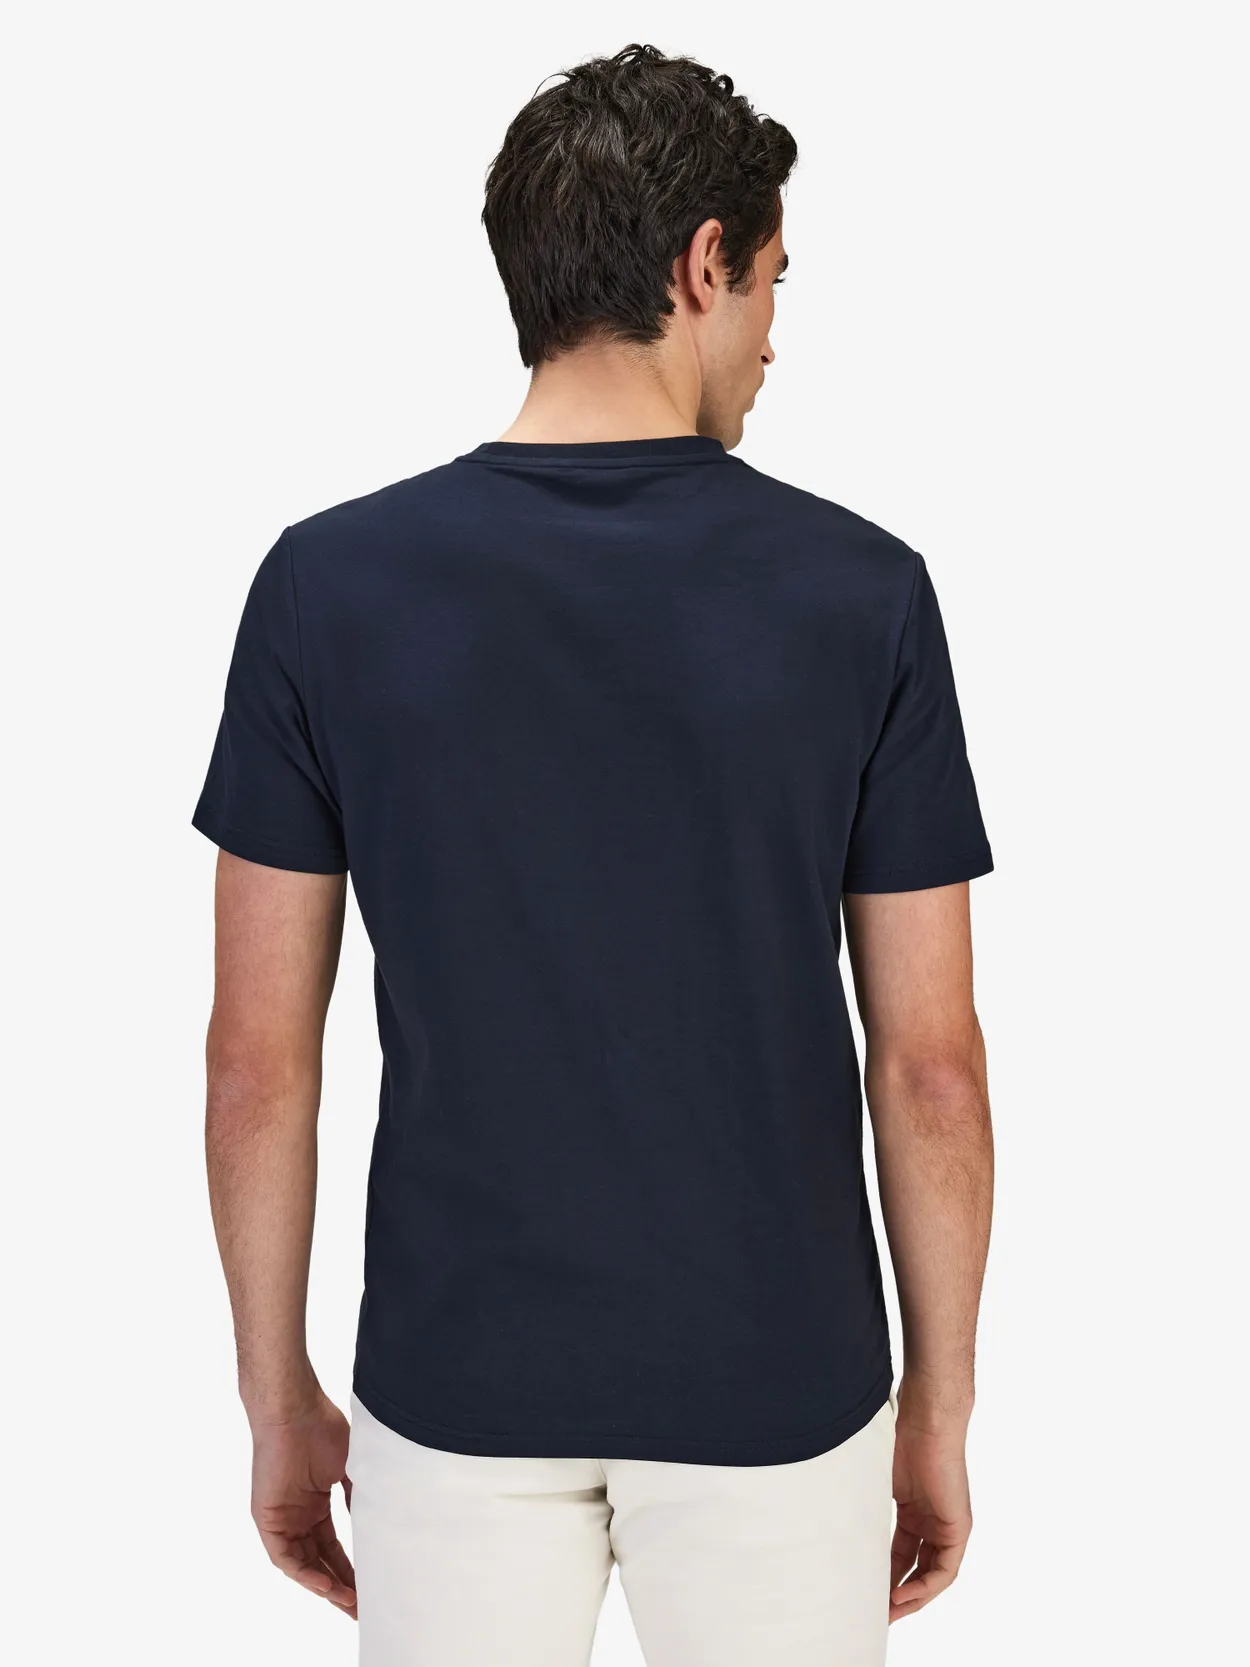 Image number 6 for product 2er-Pack weiße und blau T-Shirts